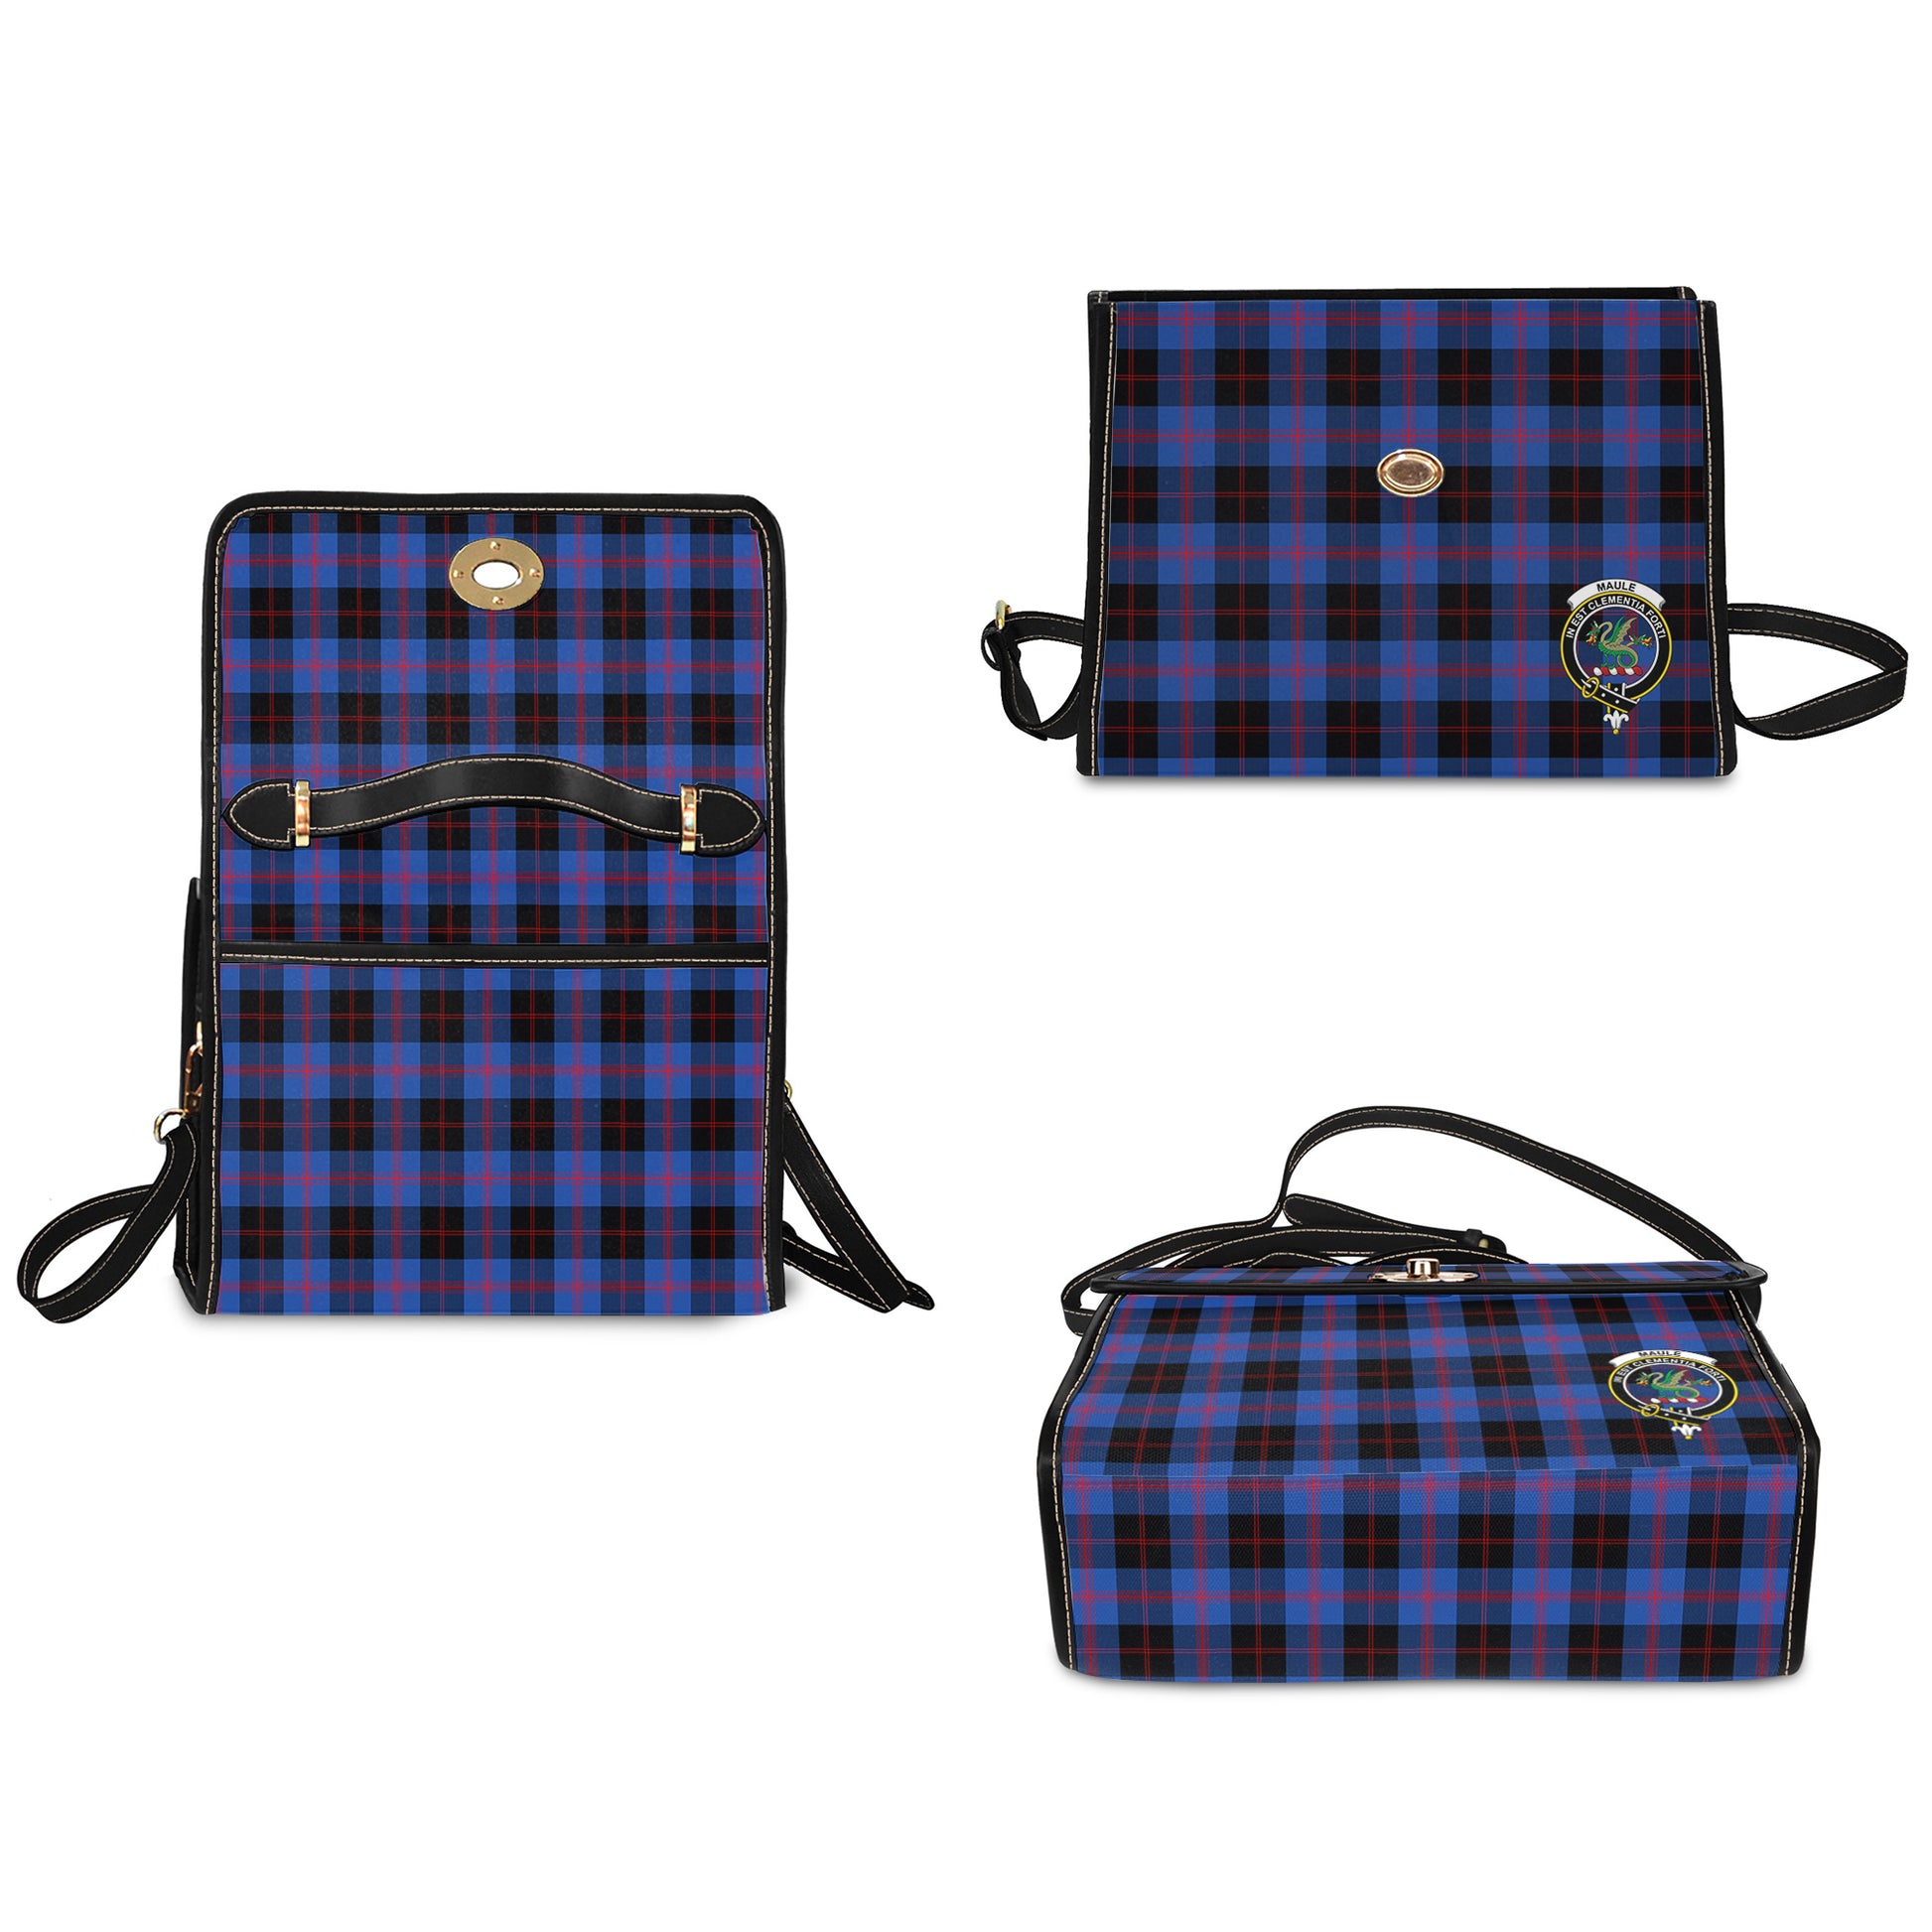 maule-tartan-leather-strap-waterproof-canvas-bag-with-family-crest